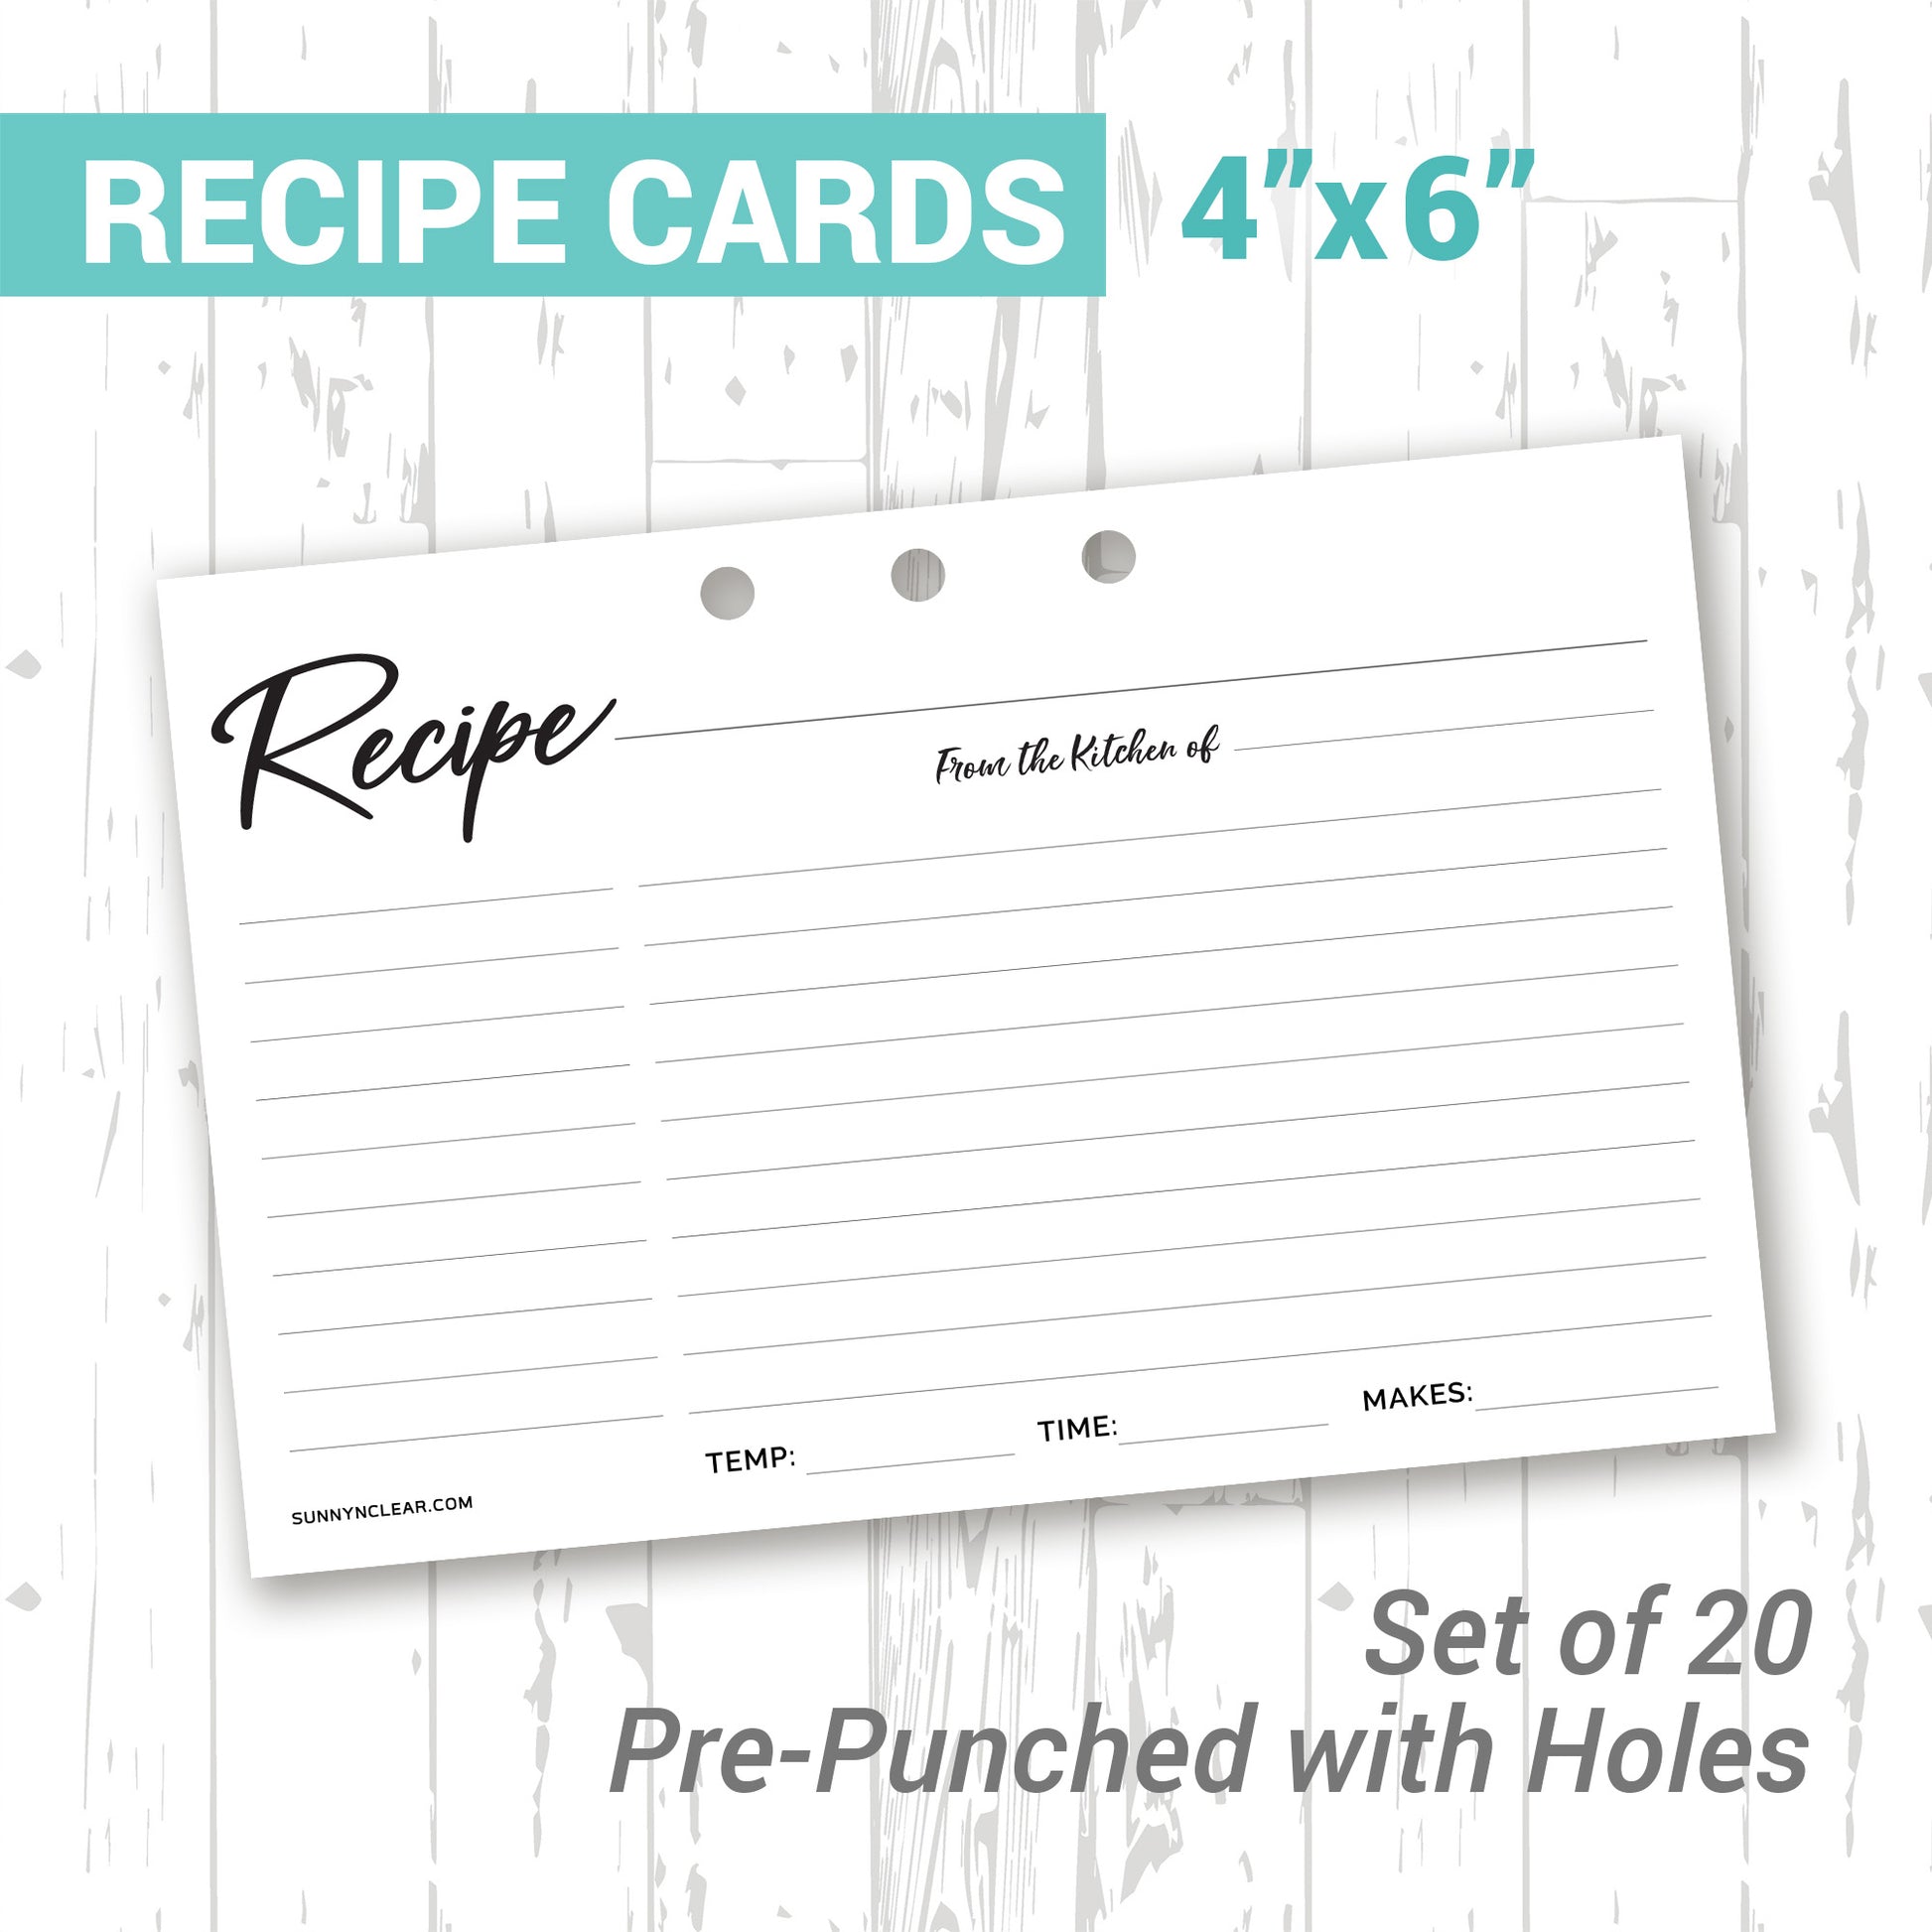 4x6 Recipe Card Refill, Set of 20 – Sunny & Clear